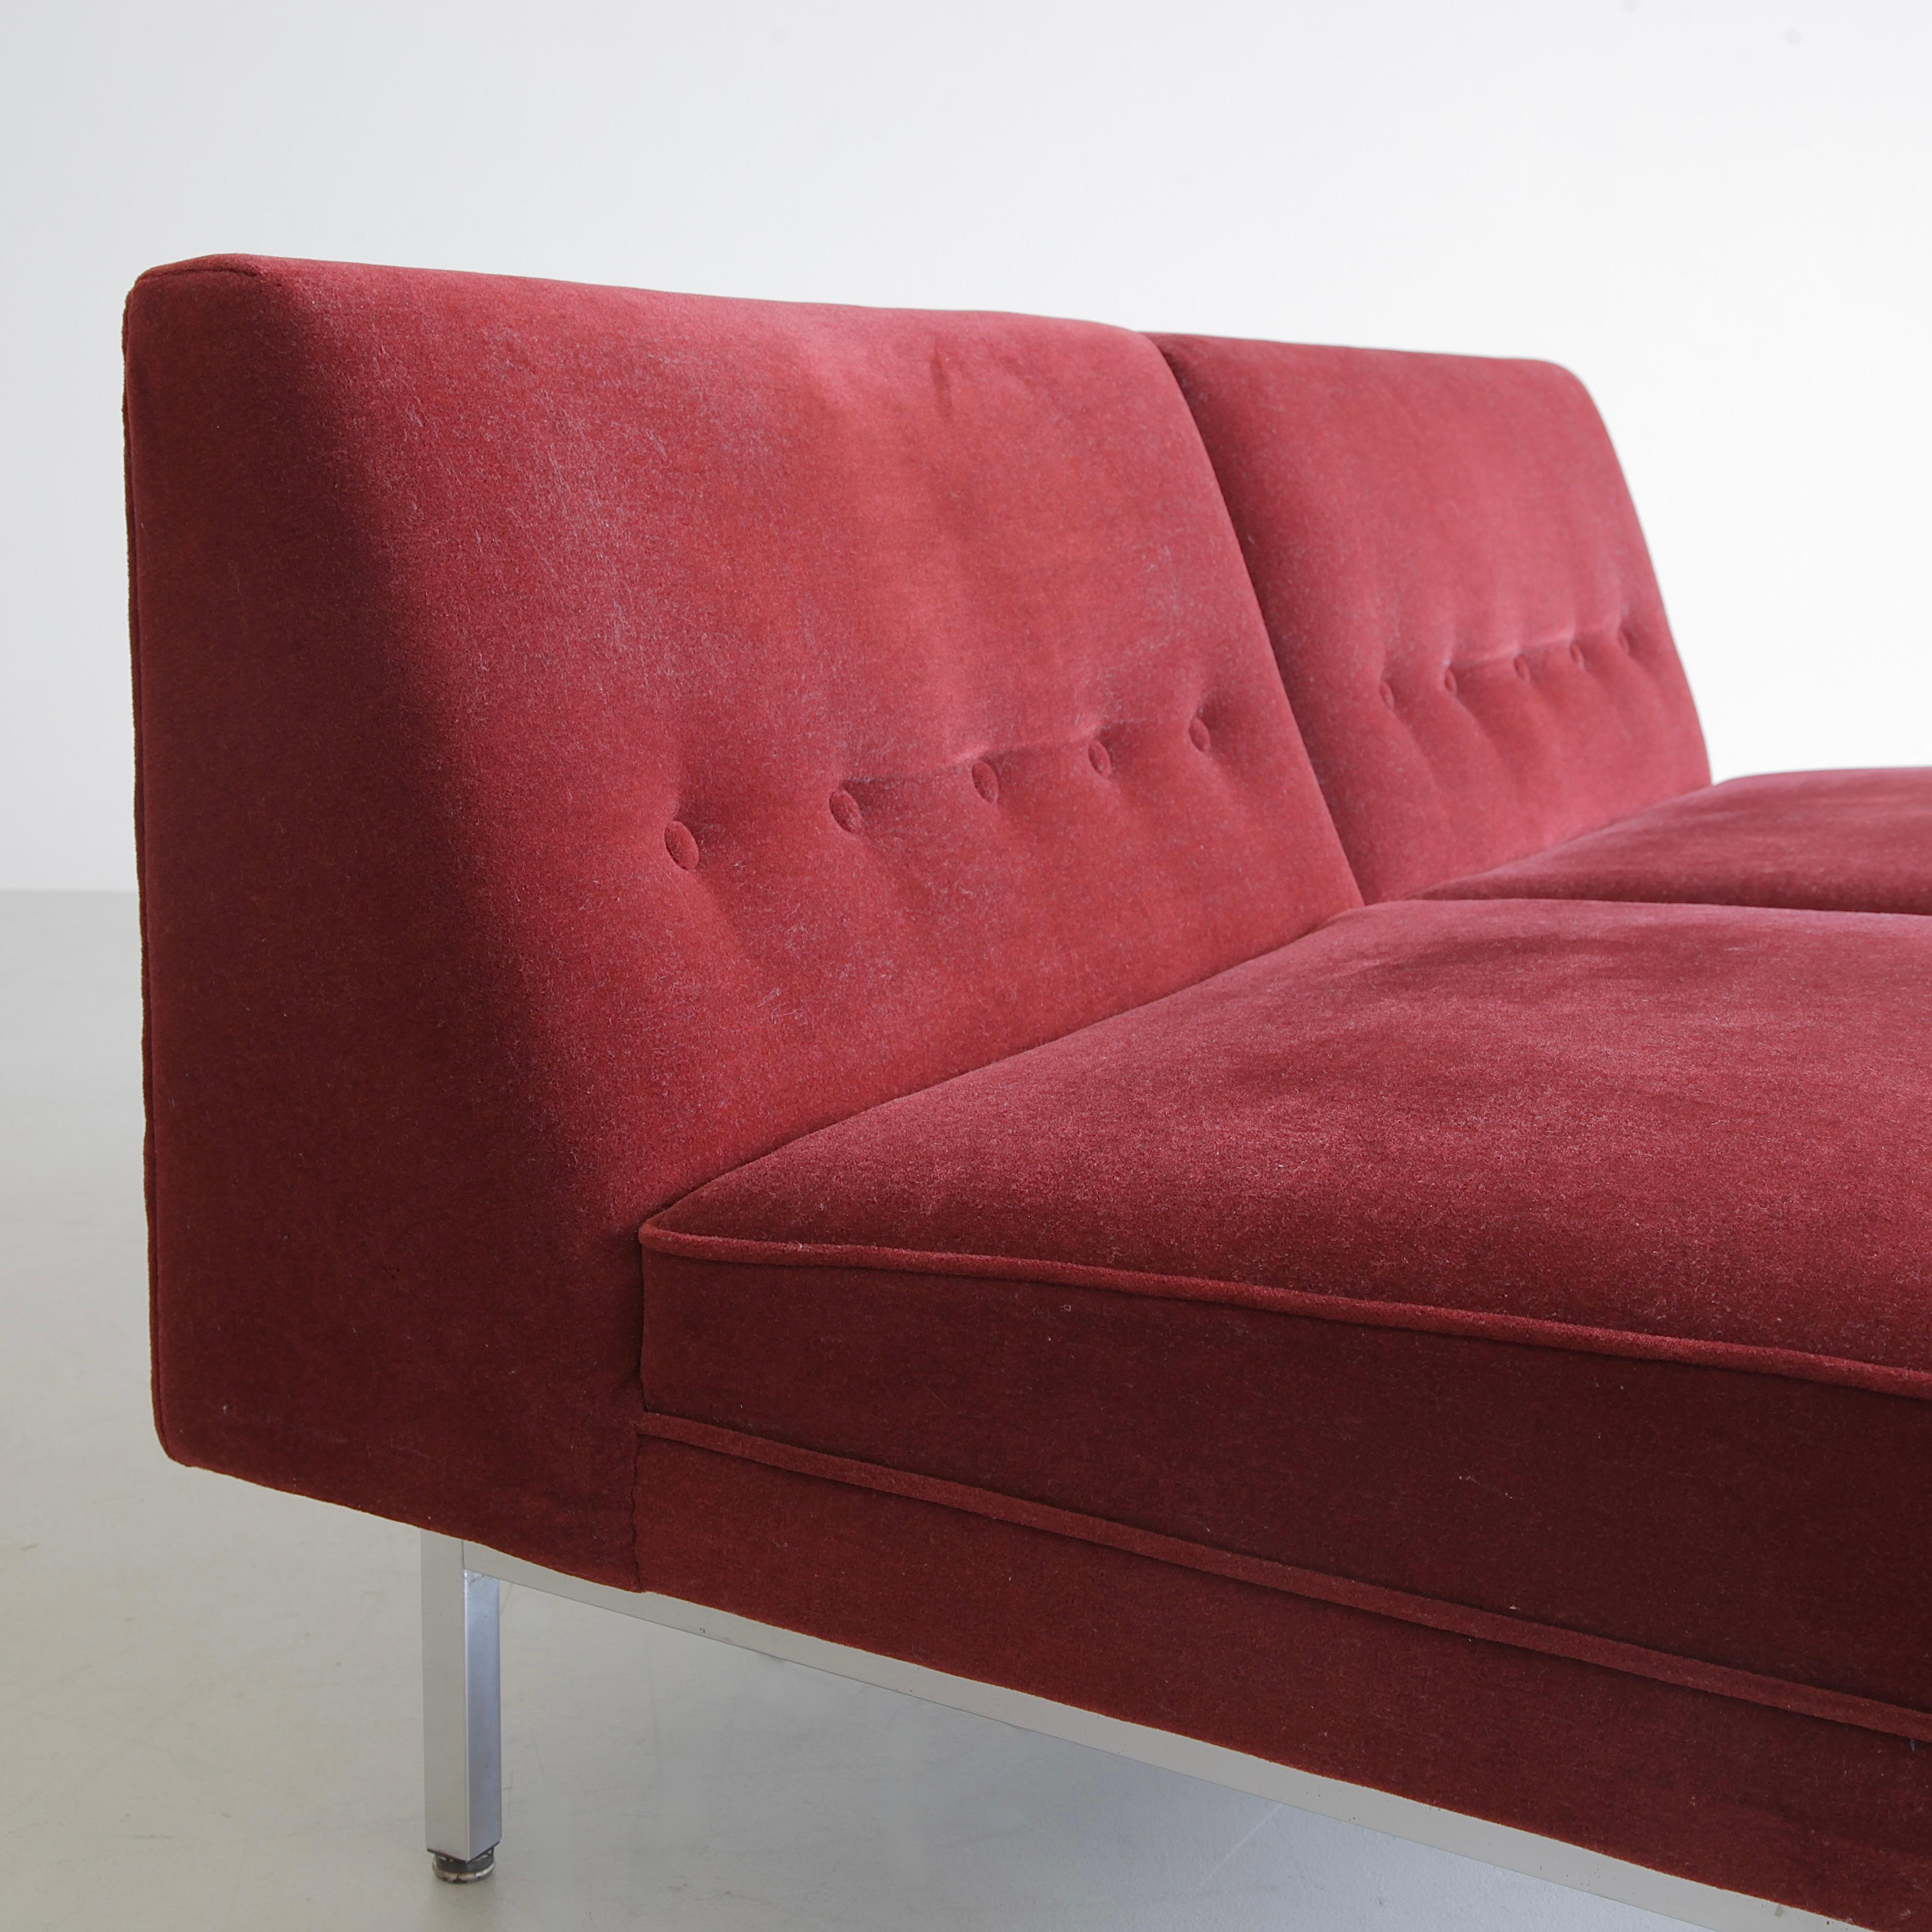 Mid-Century Modern Modular Sofa designed by George NELSON for HERMAN MILLER, 1960s For Sale